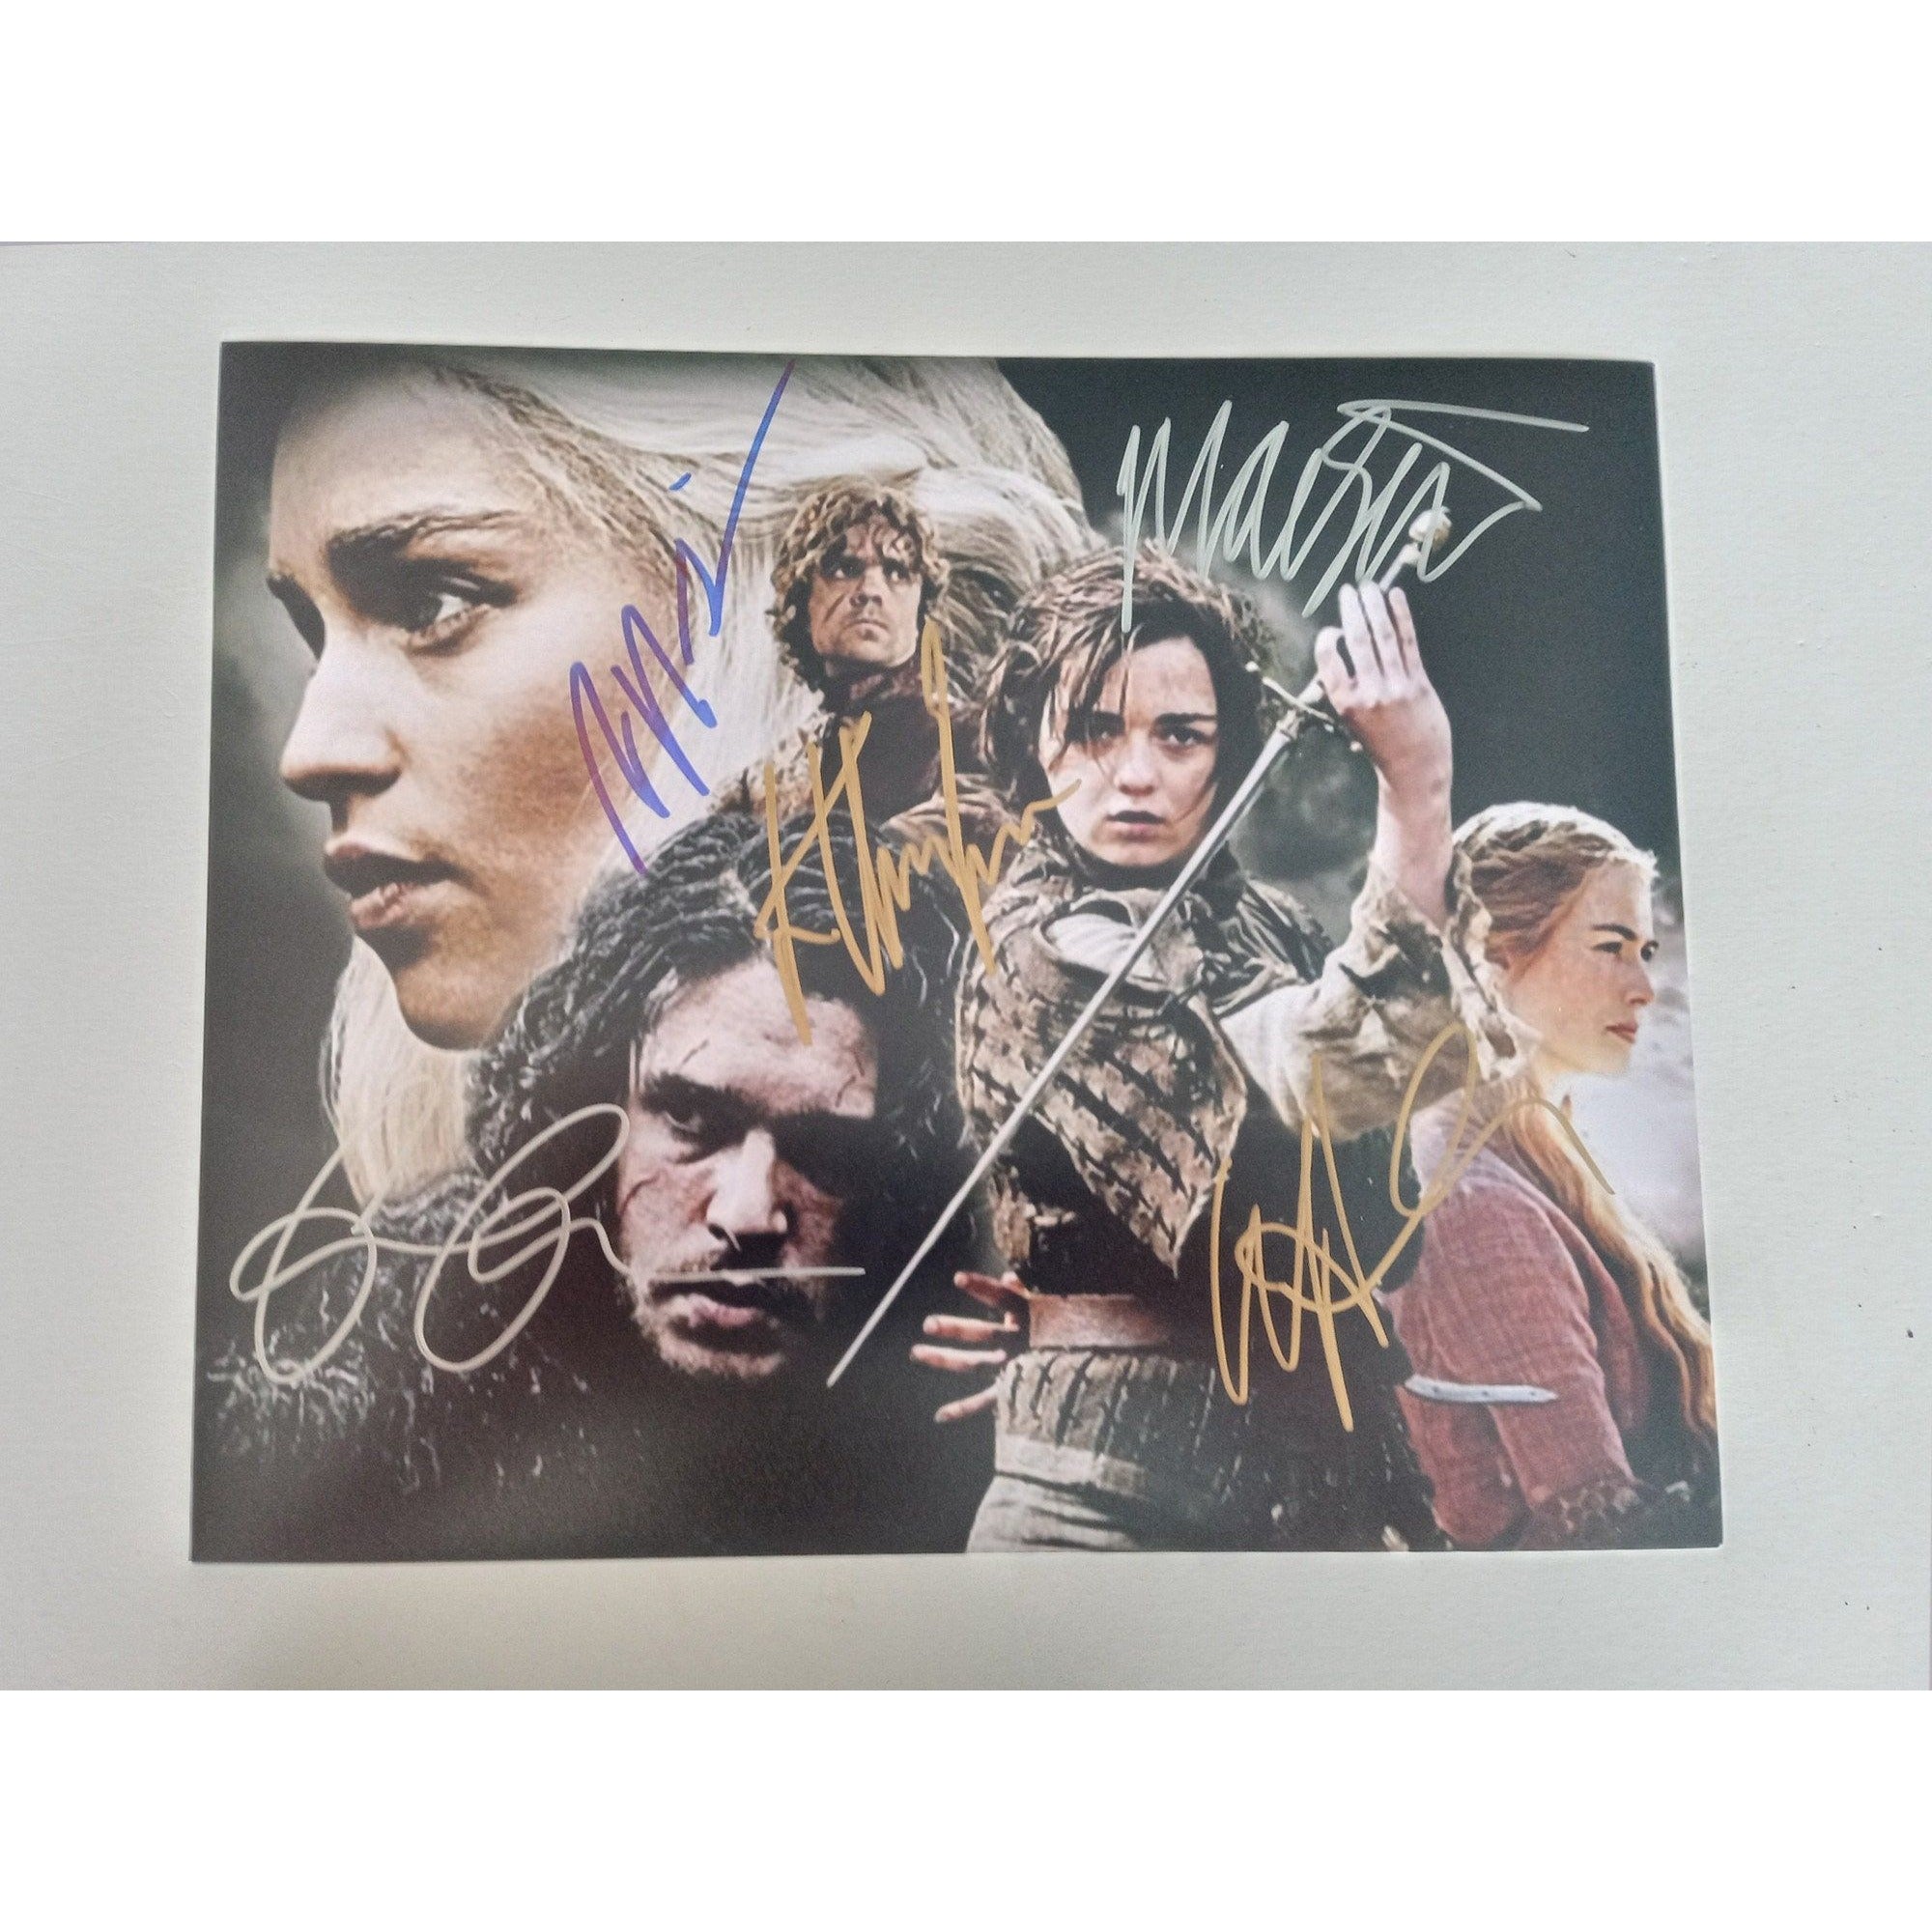 Game of Thrones Emilia Clarke, Peter Dinklage 8 by 10 signed photo